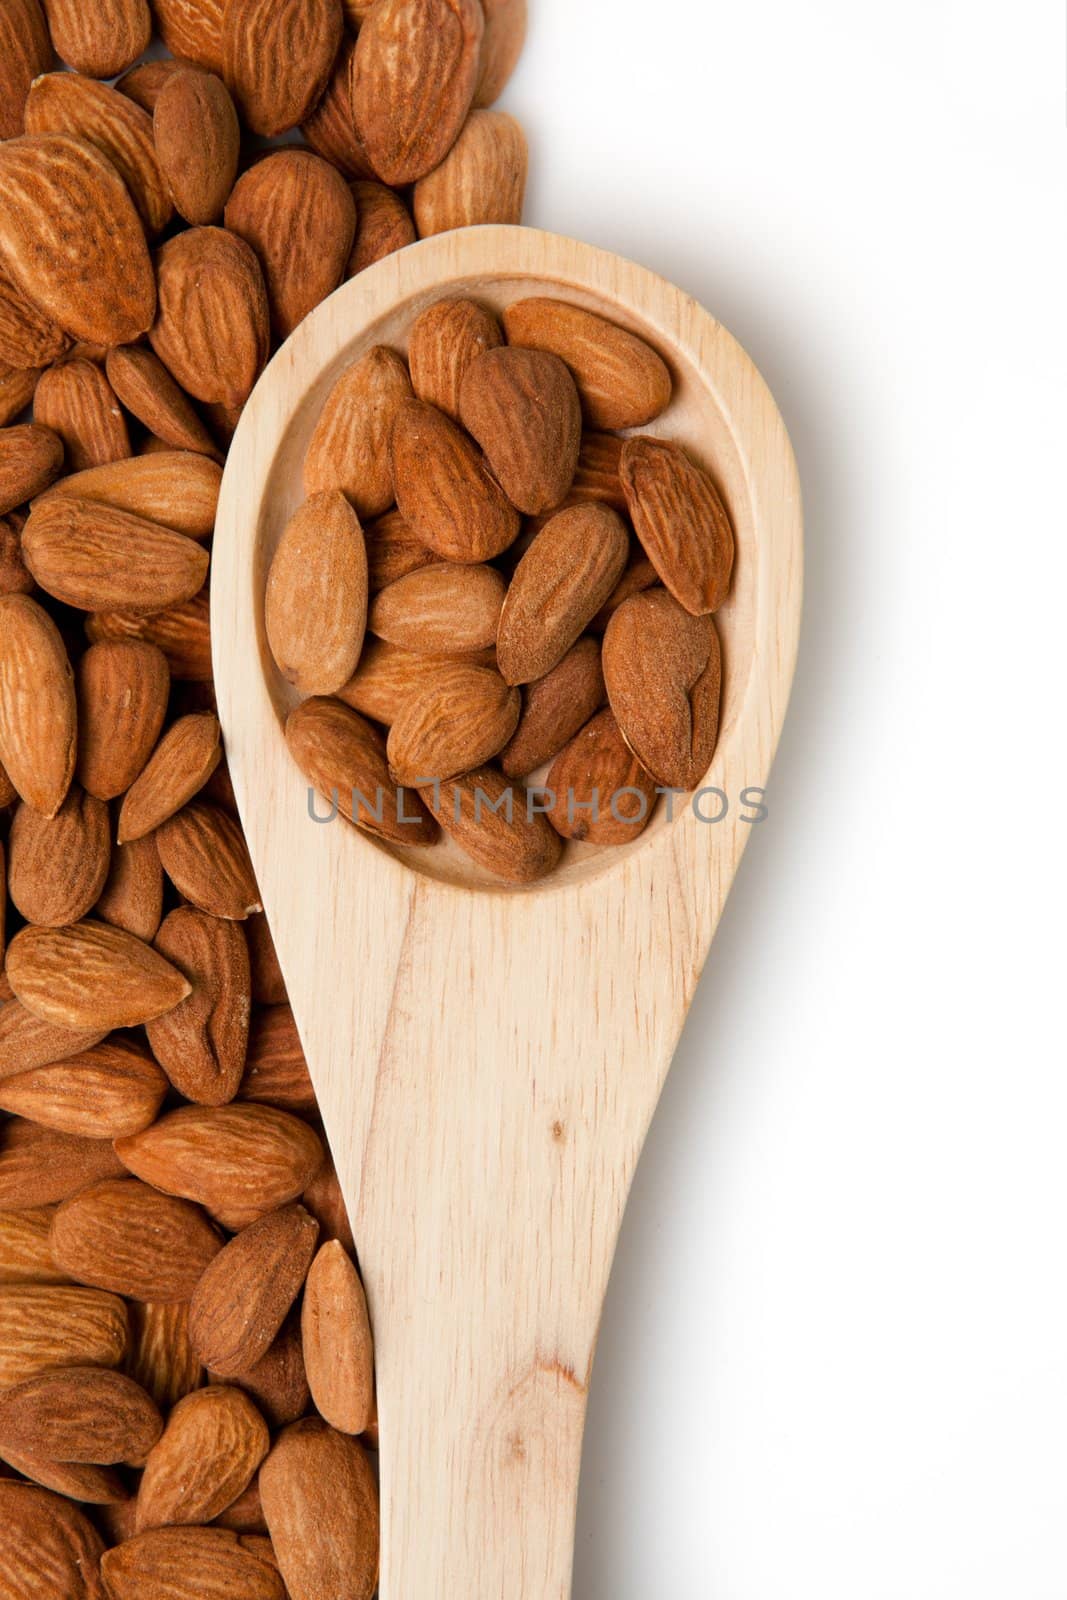 Wooden spoon traditional with almonds against a white background